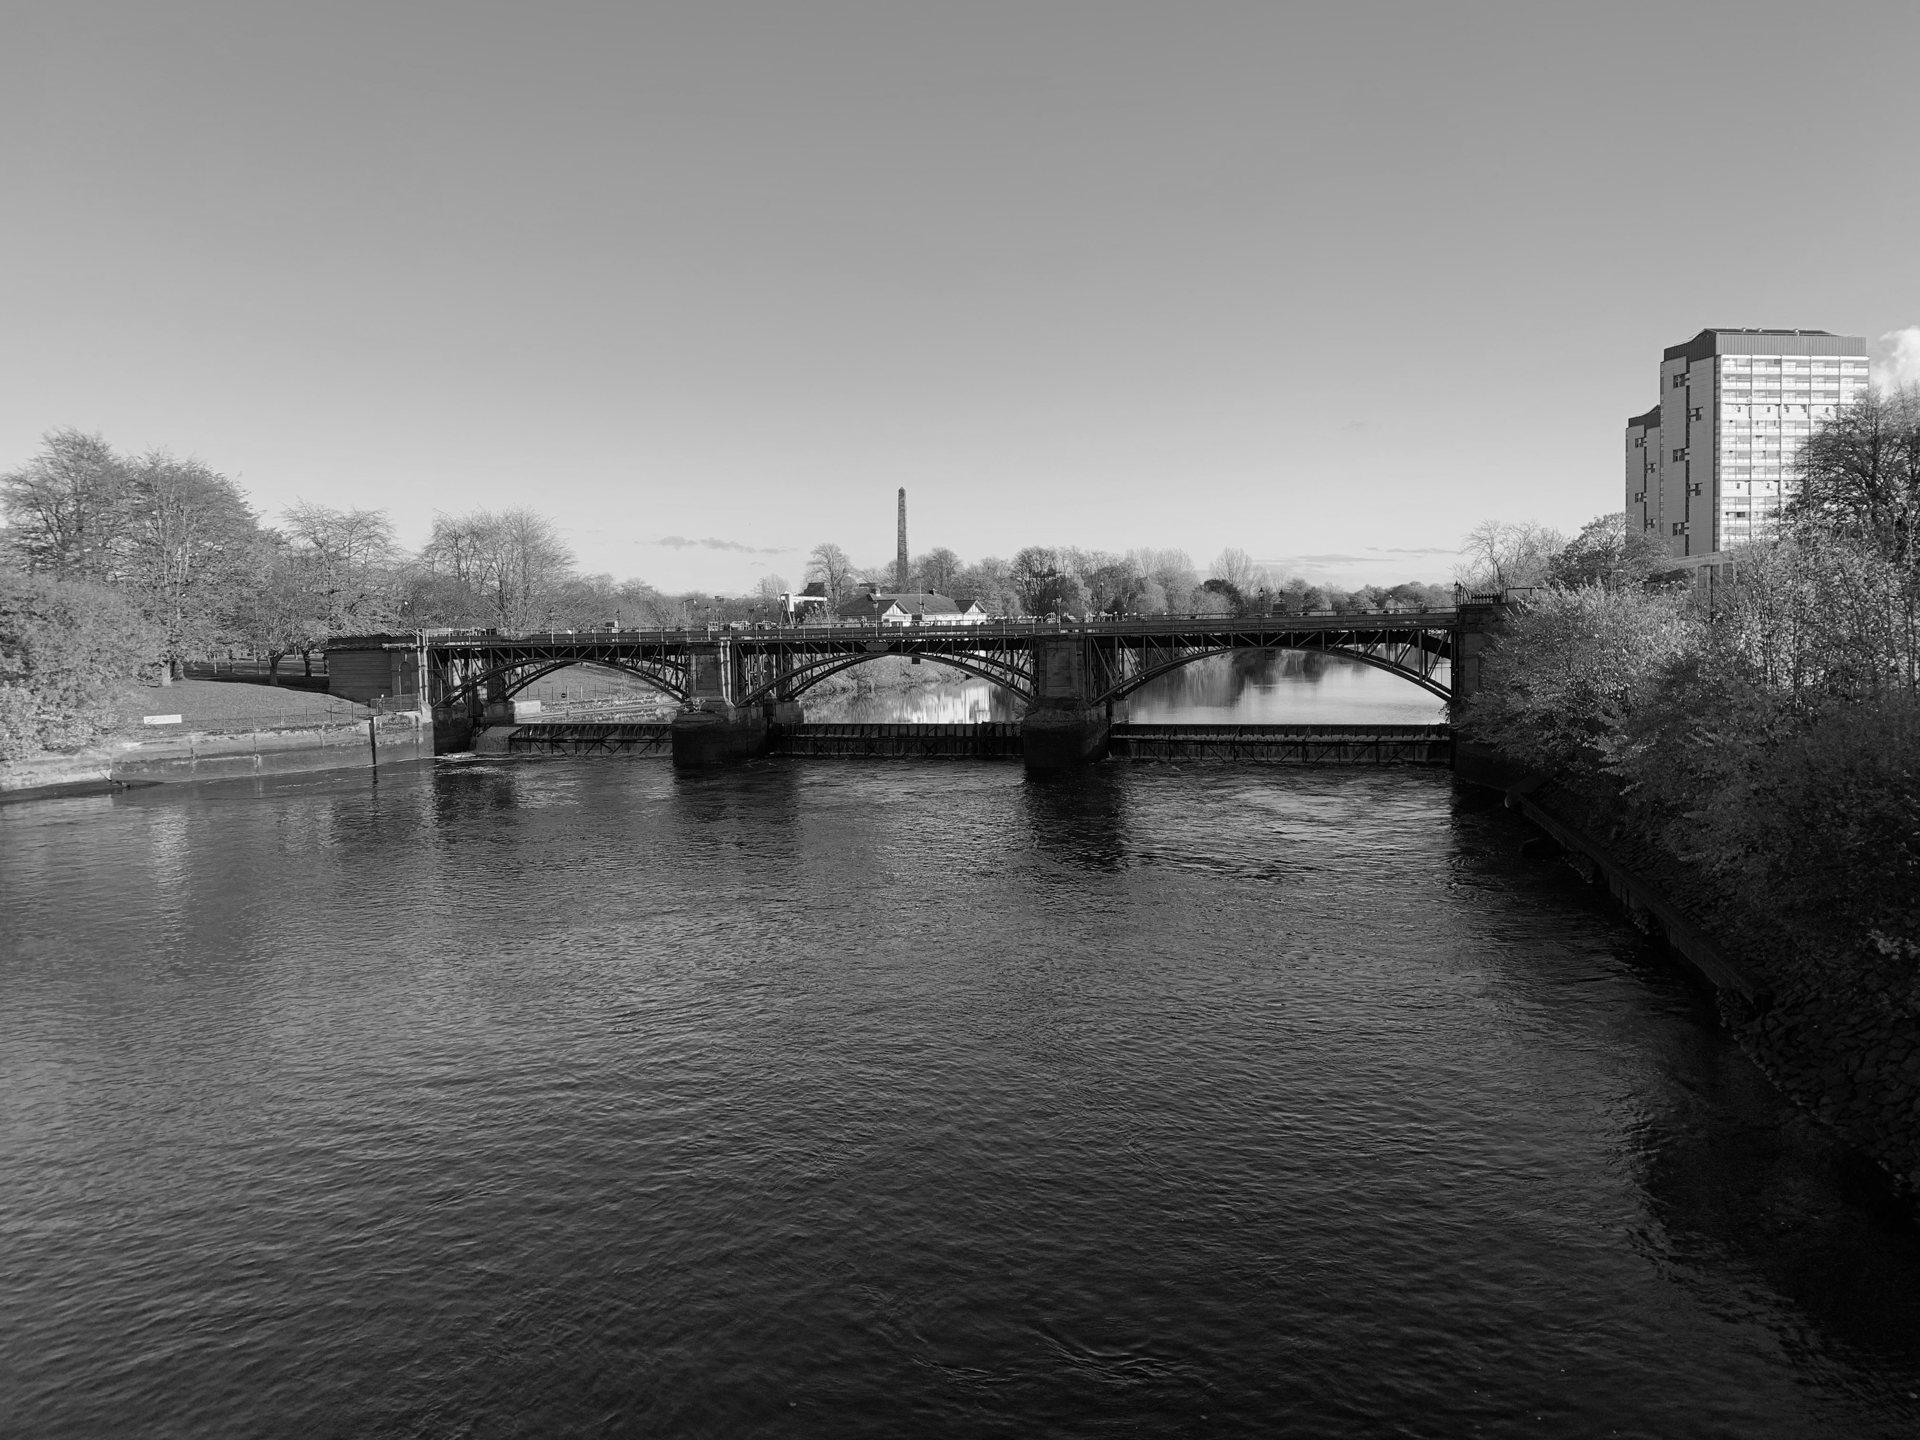 Black and white image of a bridge over water